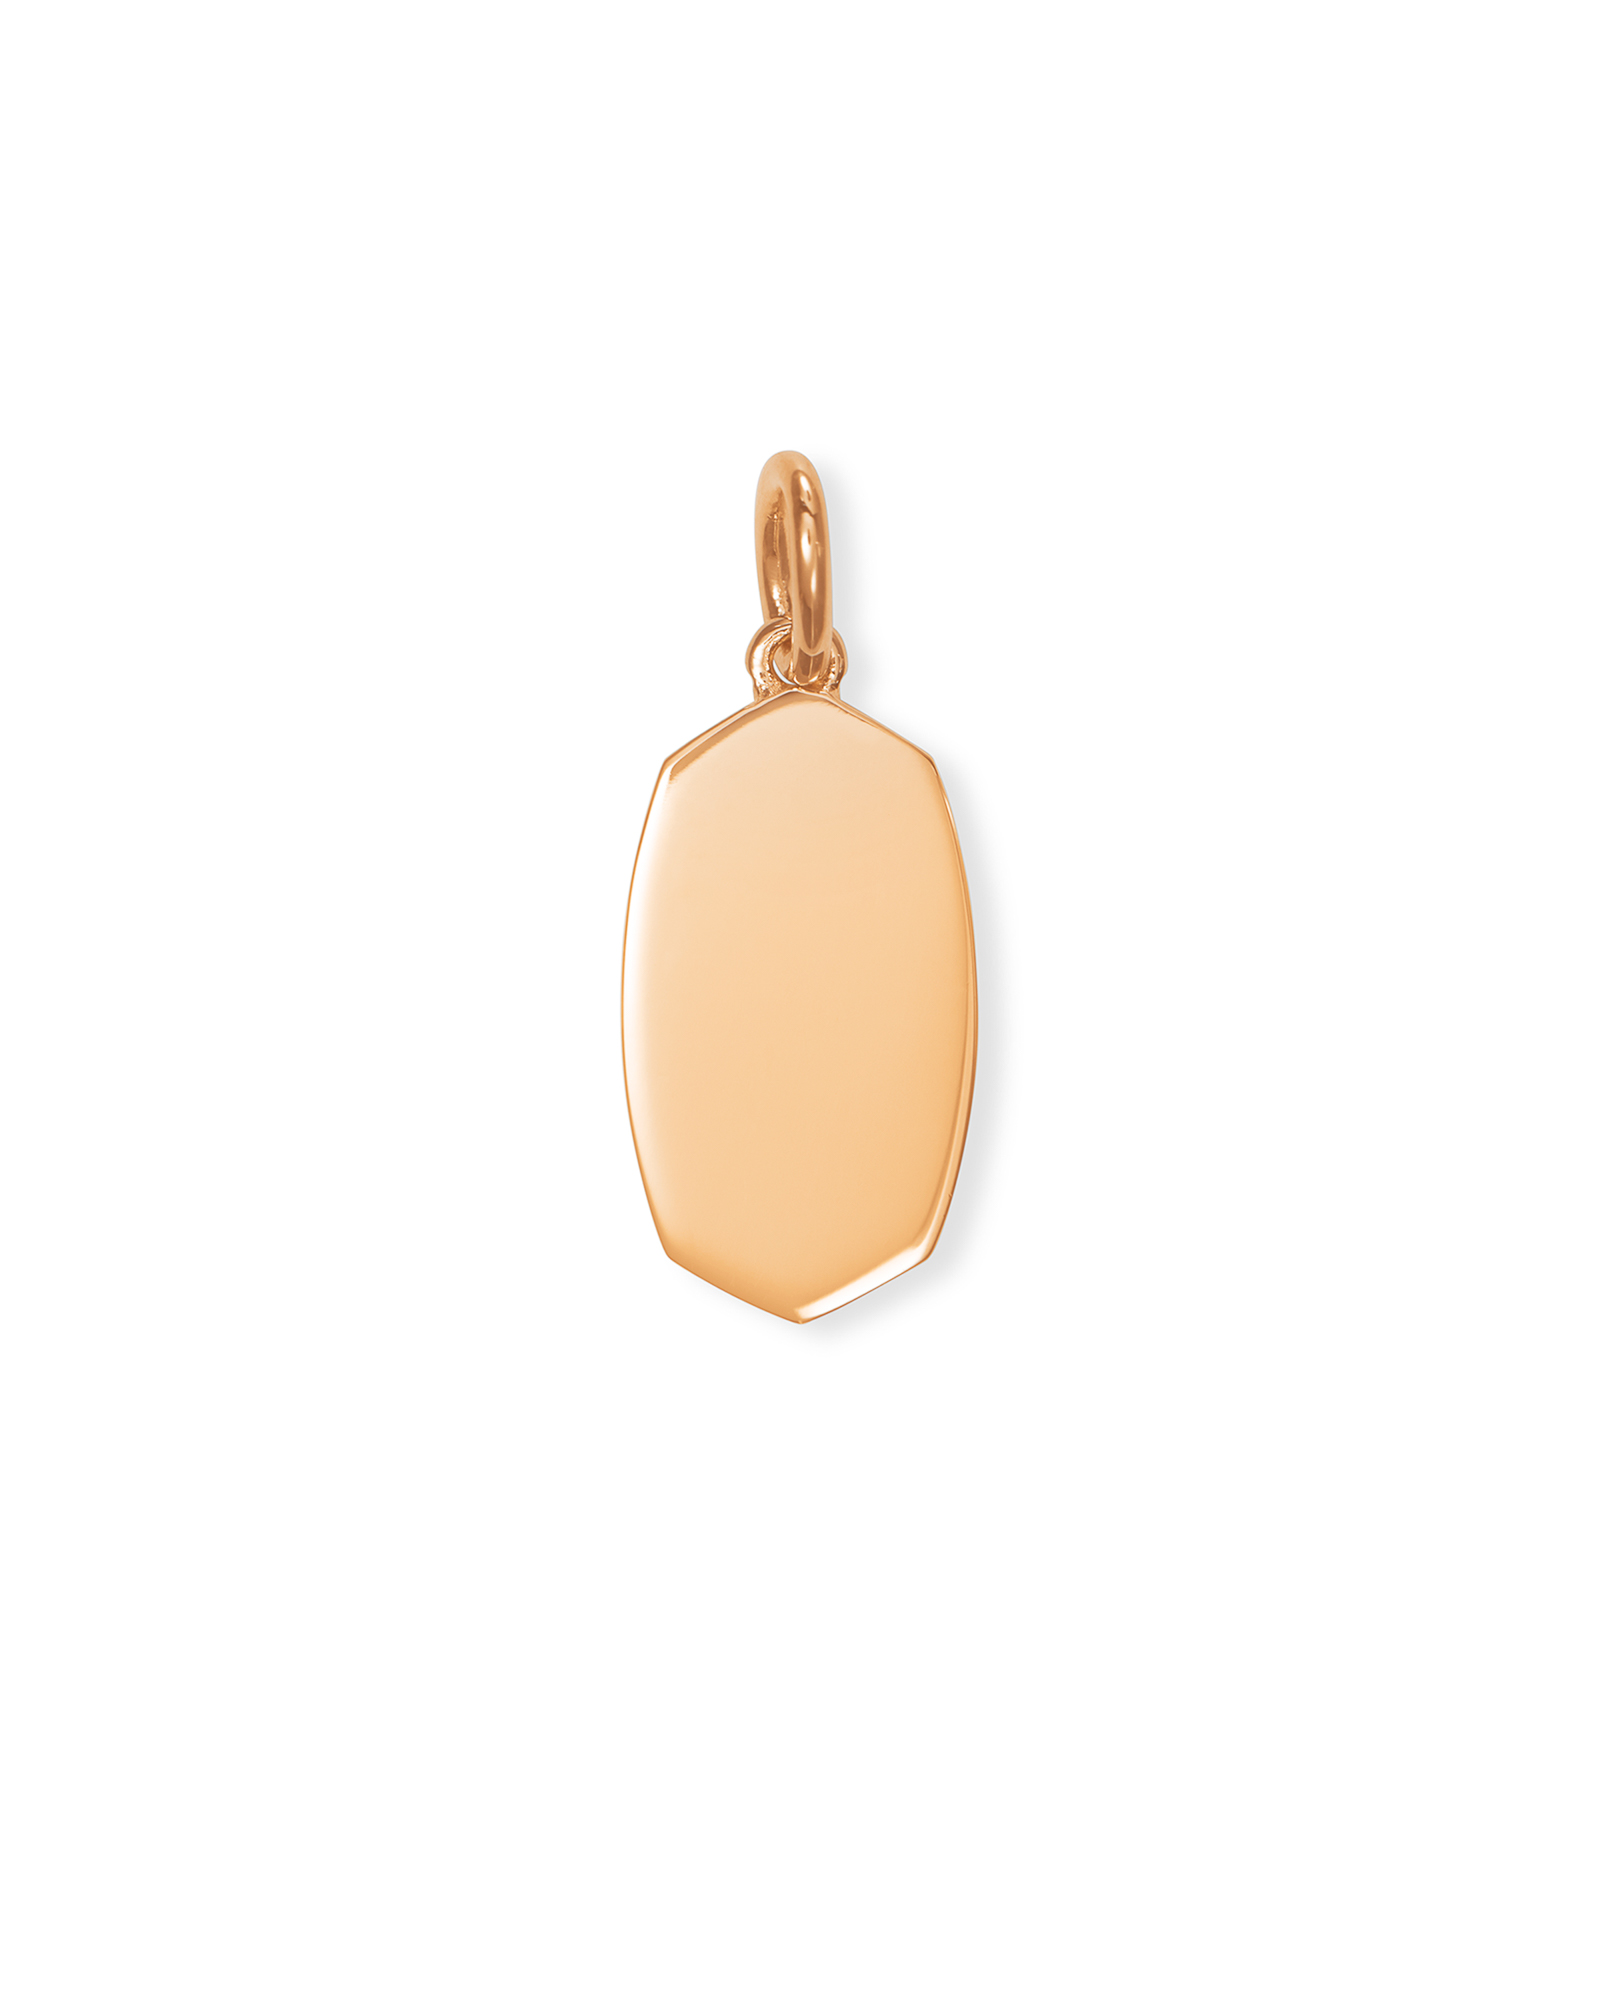 18 Inch Thin Chain Necklace in 18k Rose Gold Vermeil | Kendra Scott